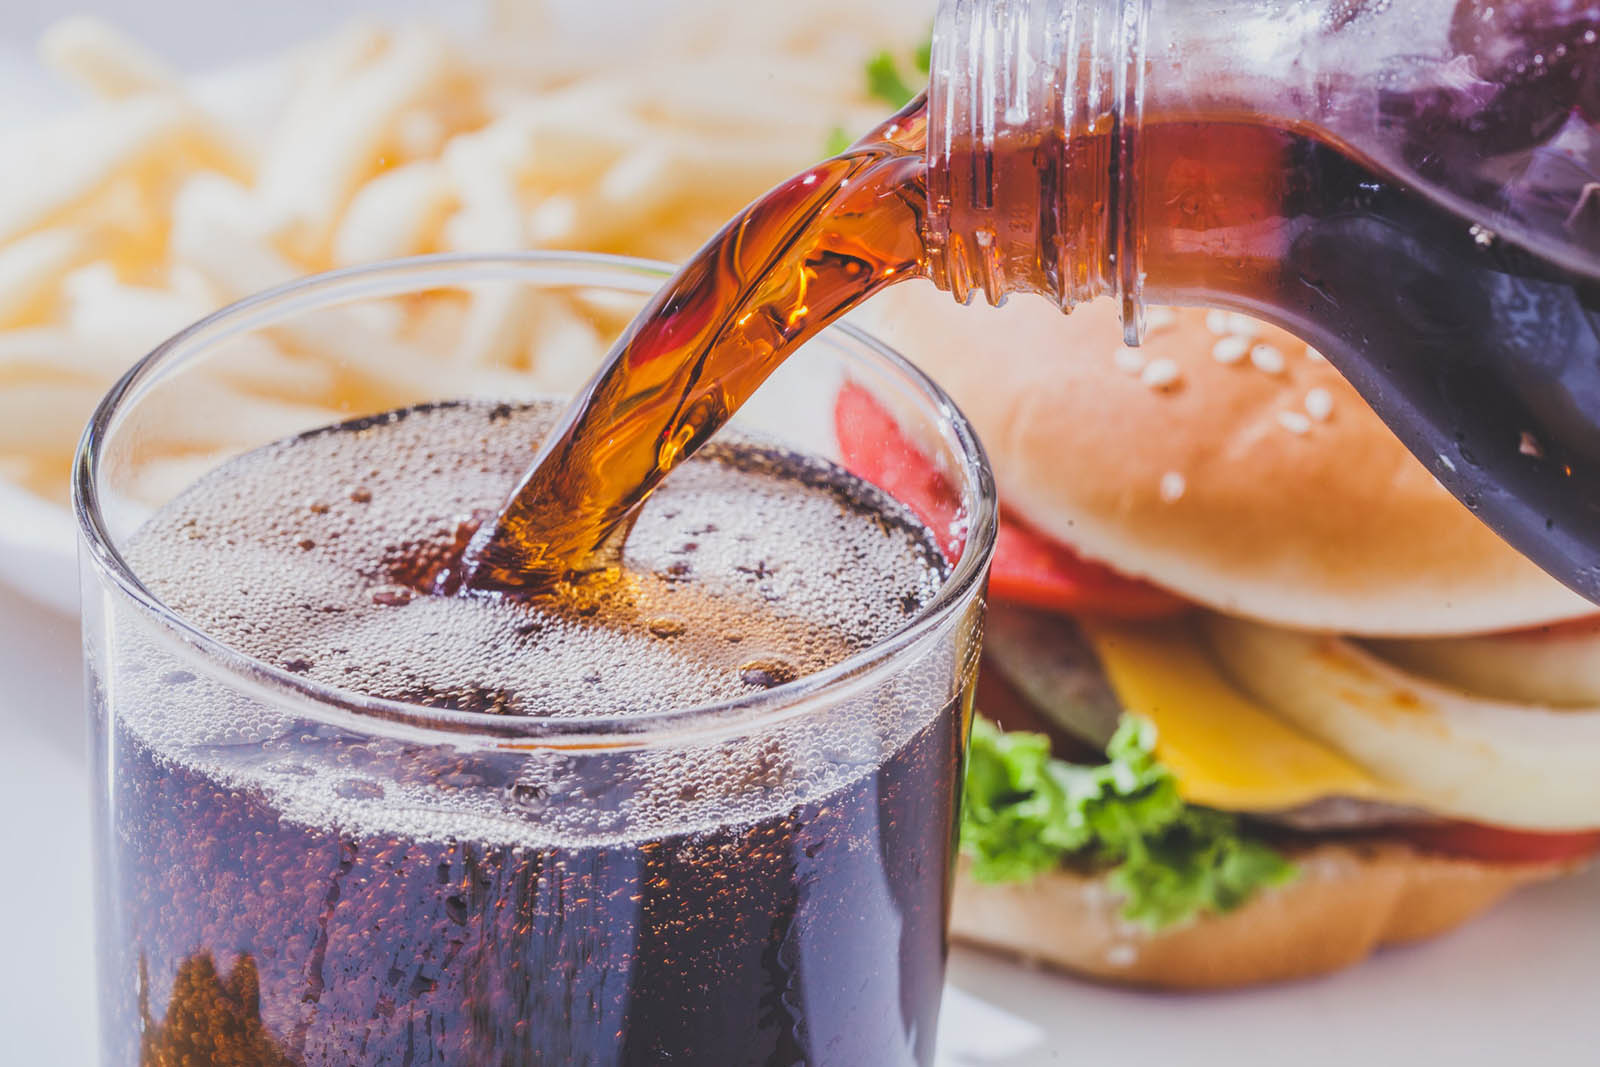 🍔 Feast on Nothing but Junk Food and We’ll Reveal Your True Personality Type Soda Coca Cola Soft Drink Burger Fast Food